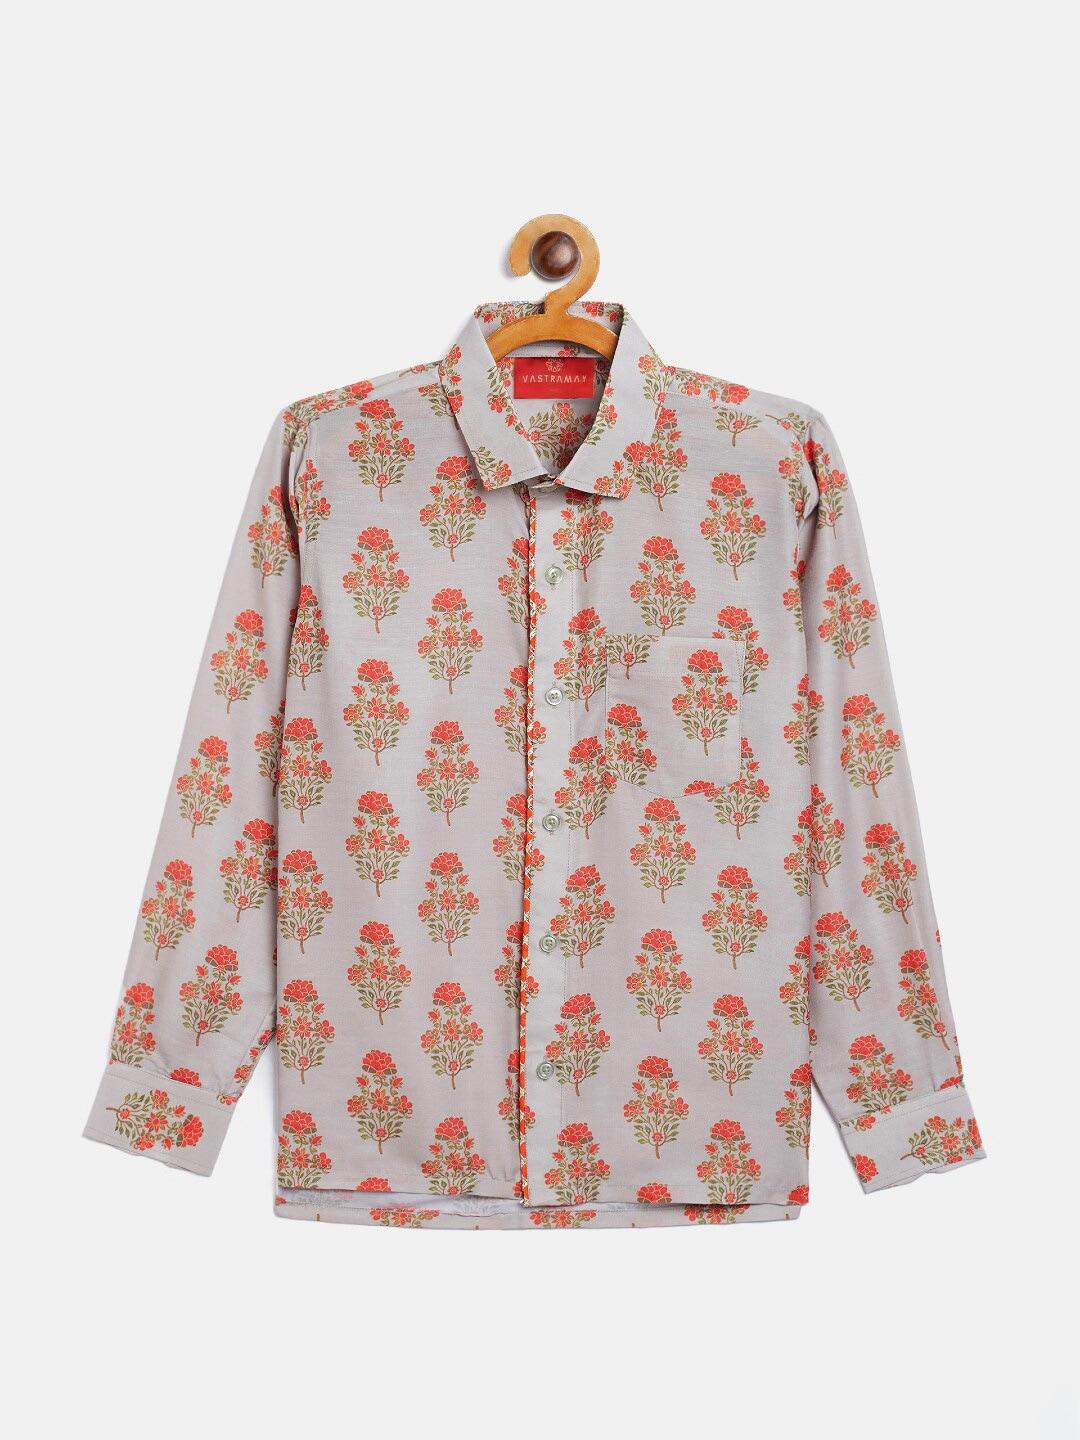 VASTRAMAY Boys Multicoloured Floral Opaque Printed Party Shirt